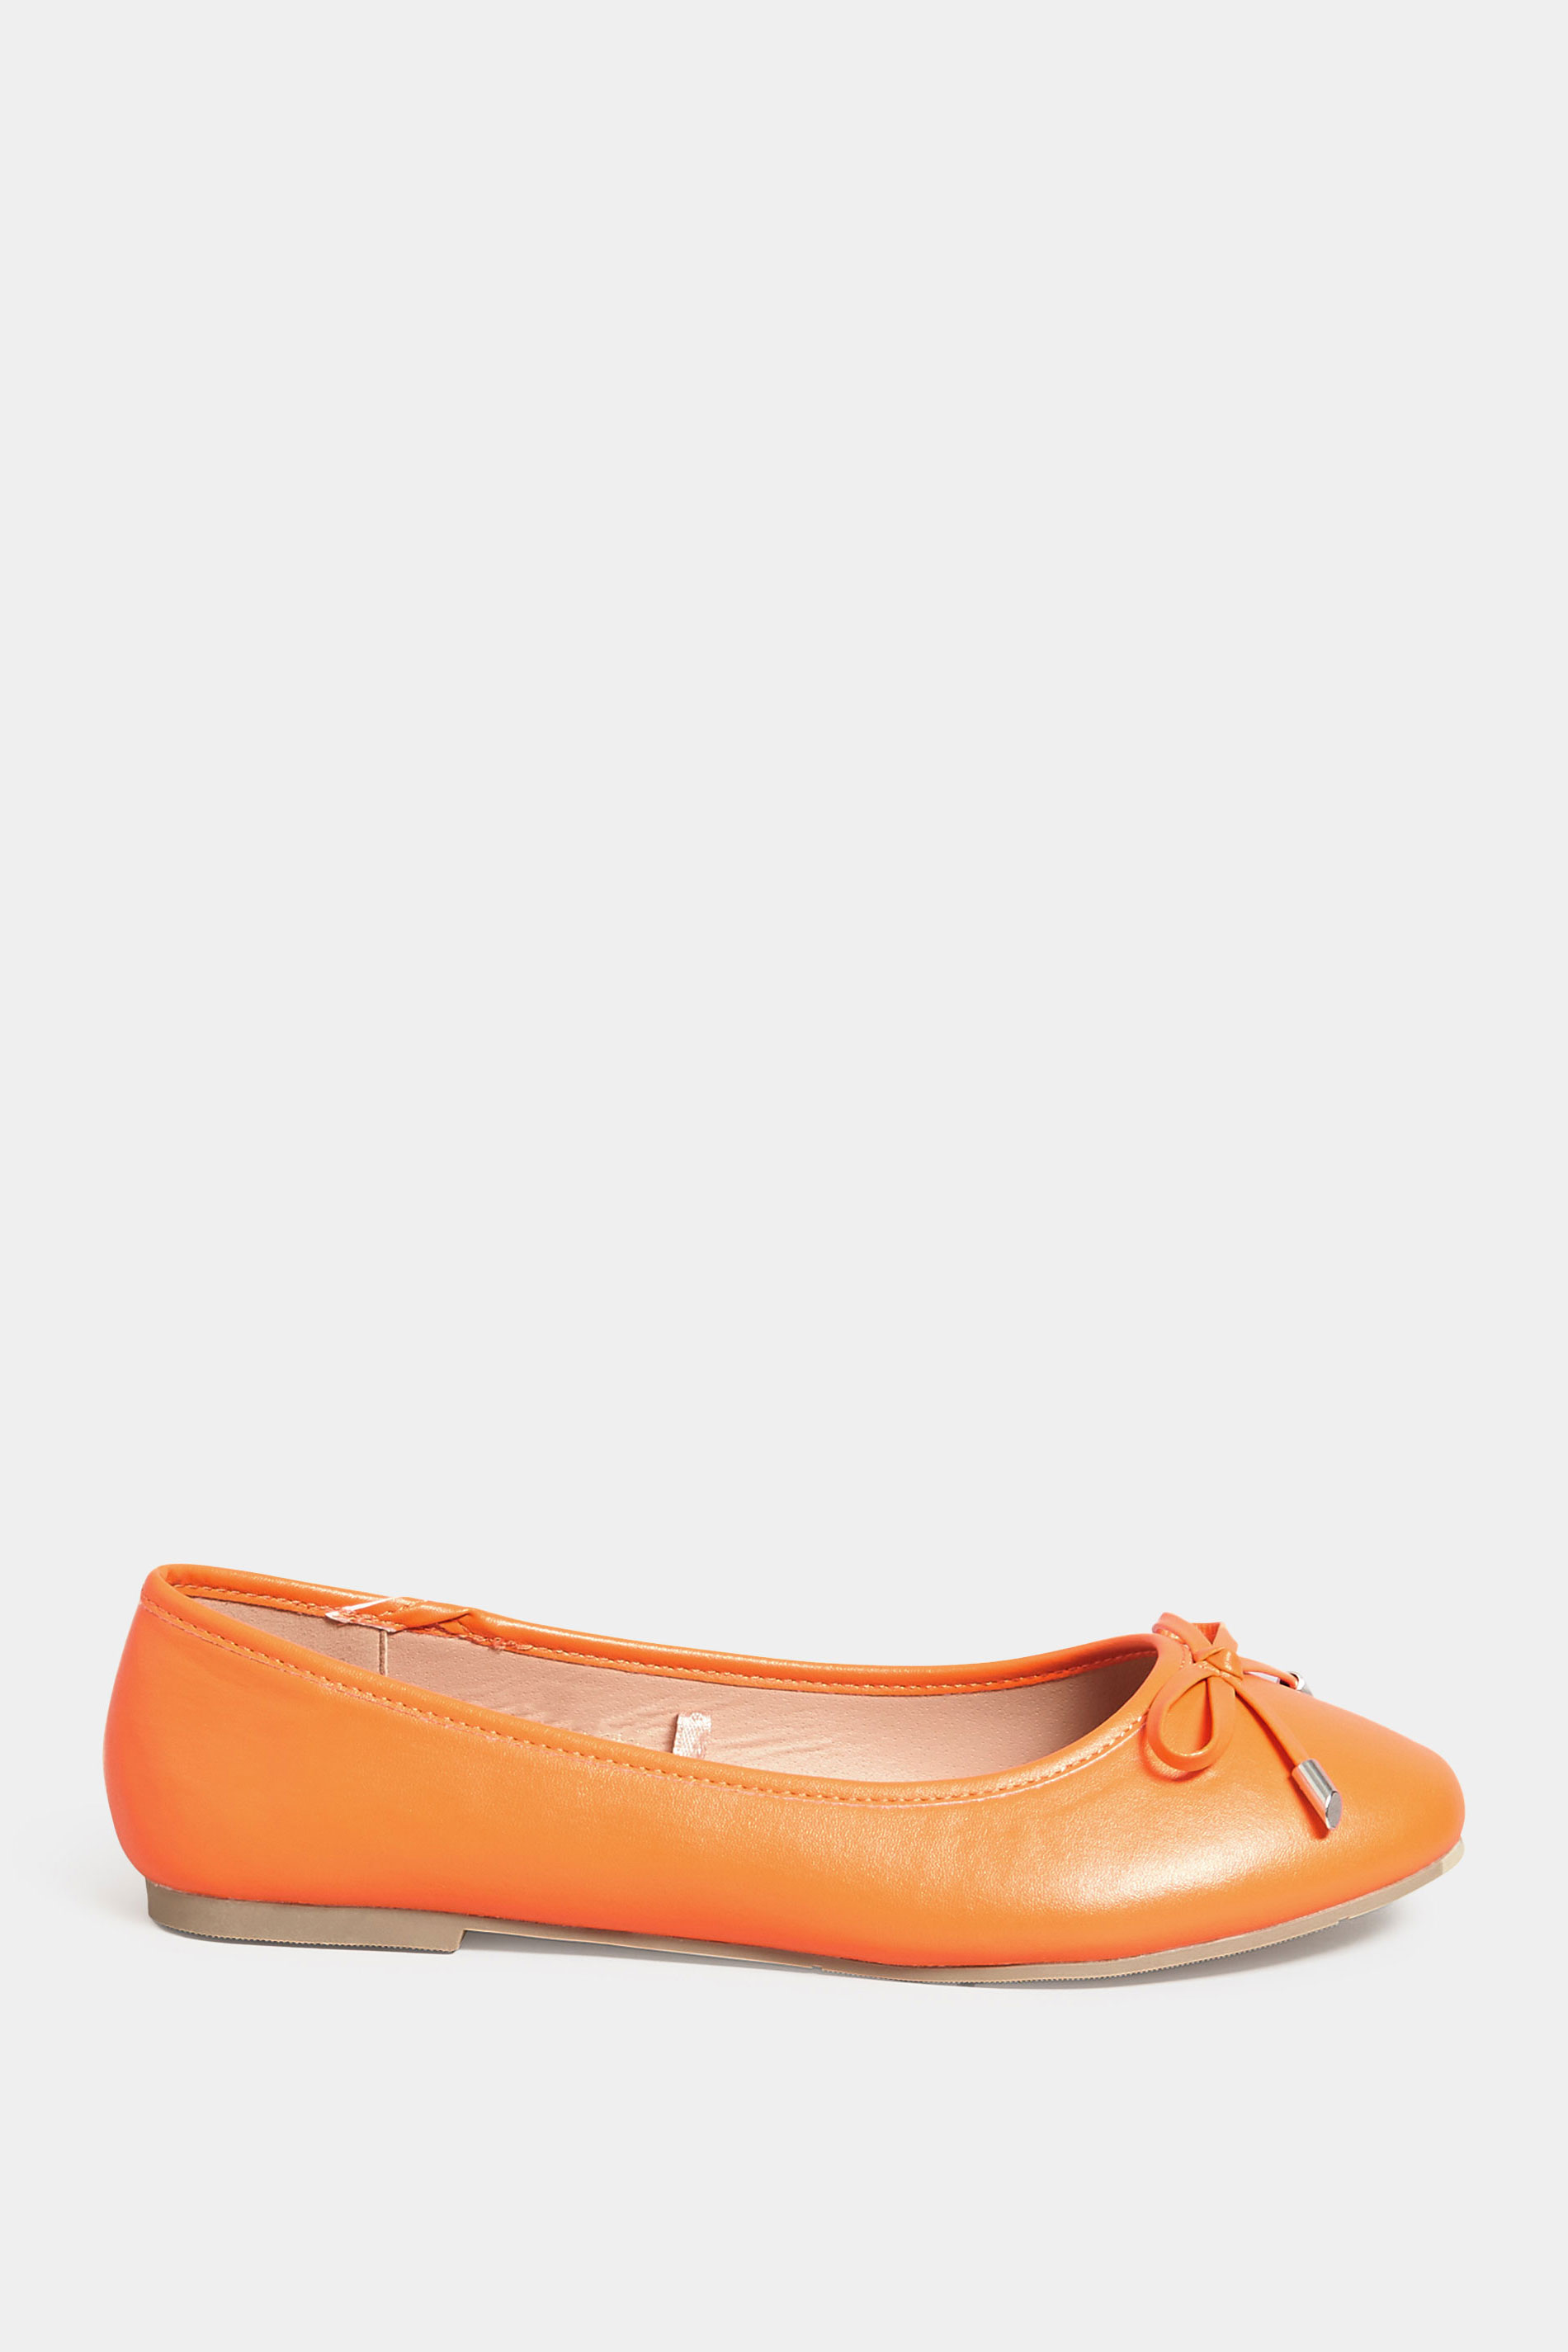 Orange Ballerina Pumps In Wide E Fit & Extra Wide EEE Fit| Yours Clothing 3